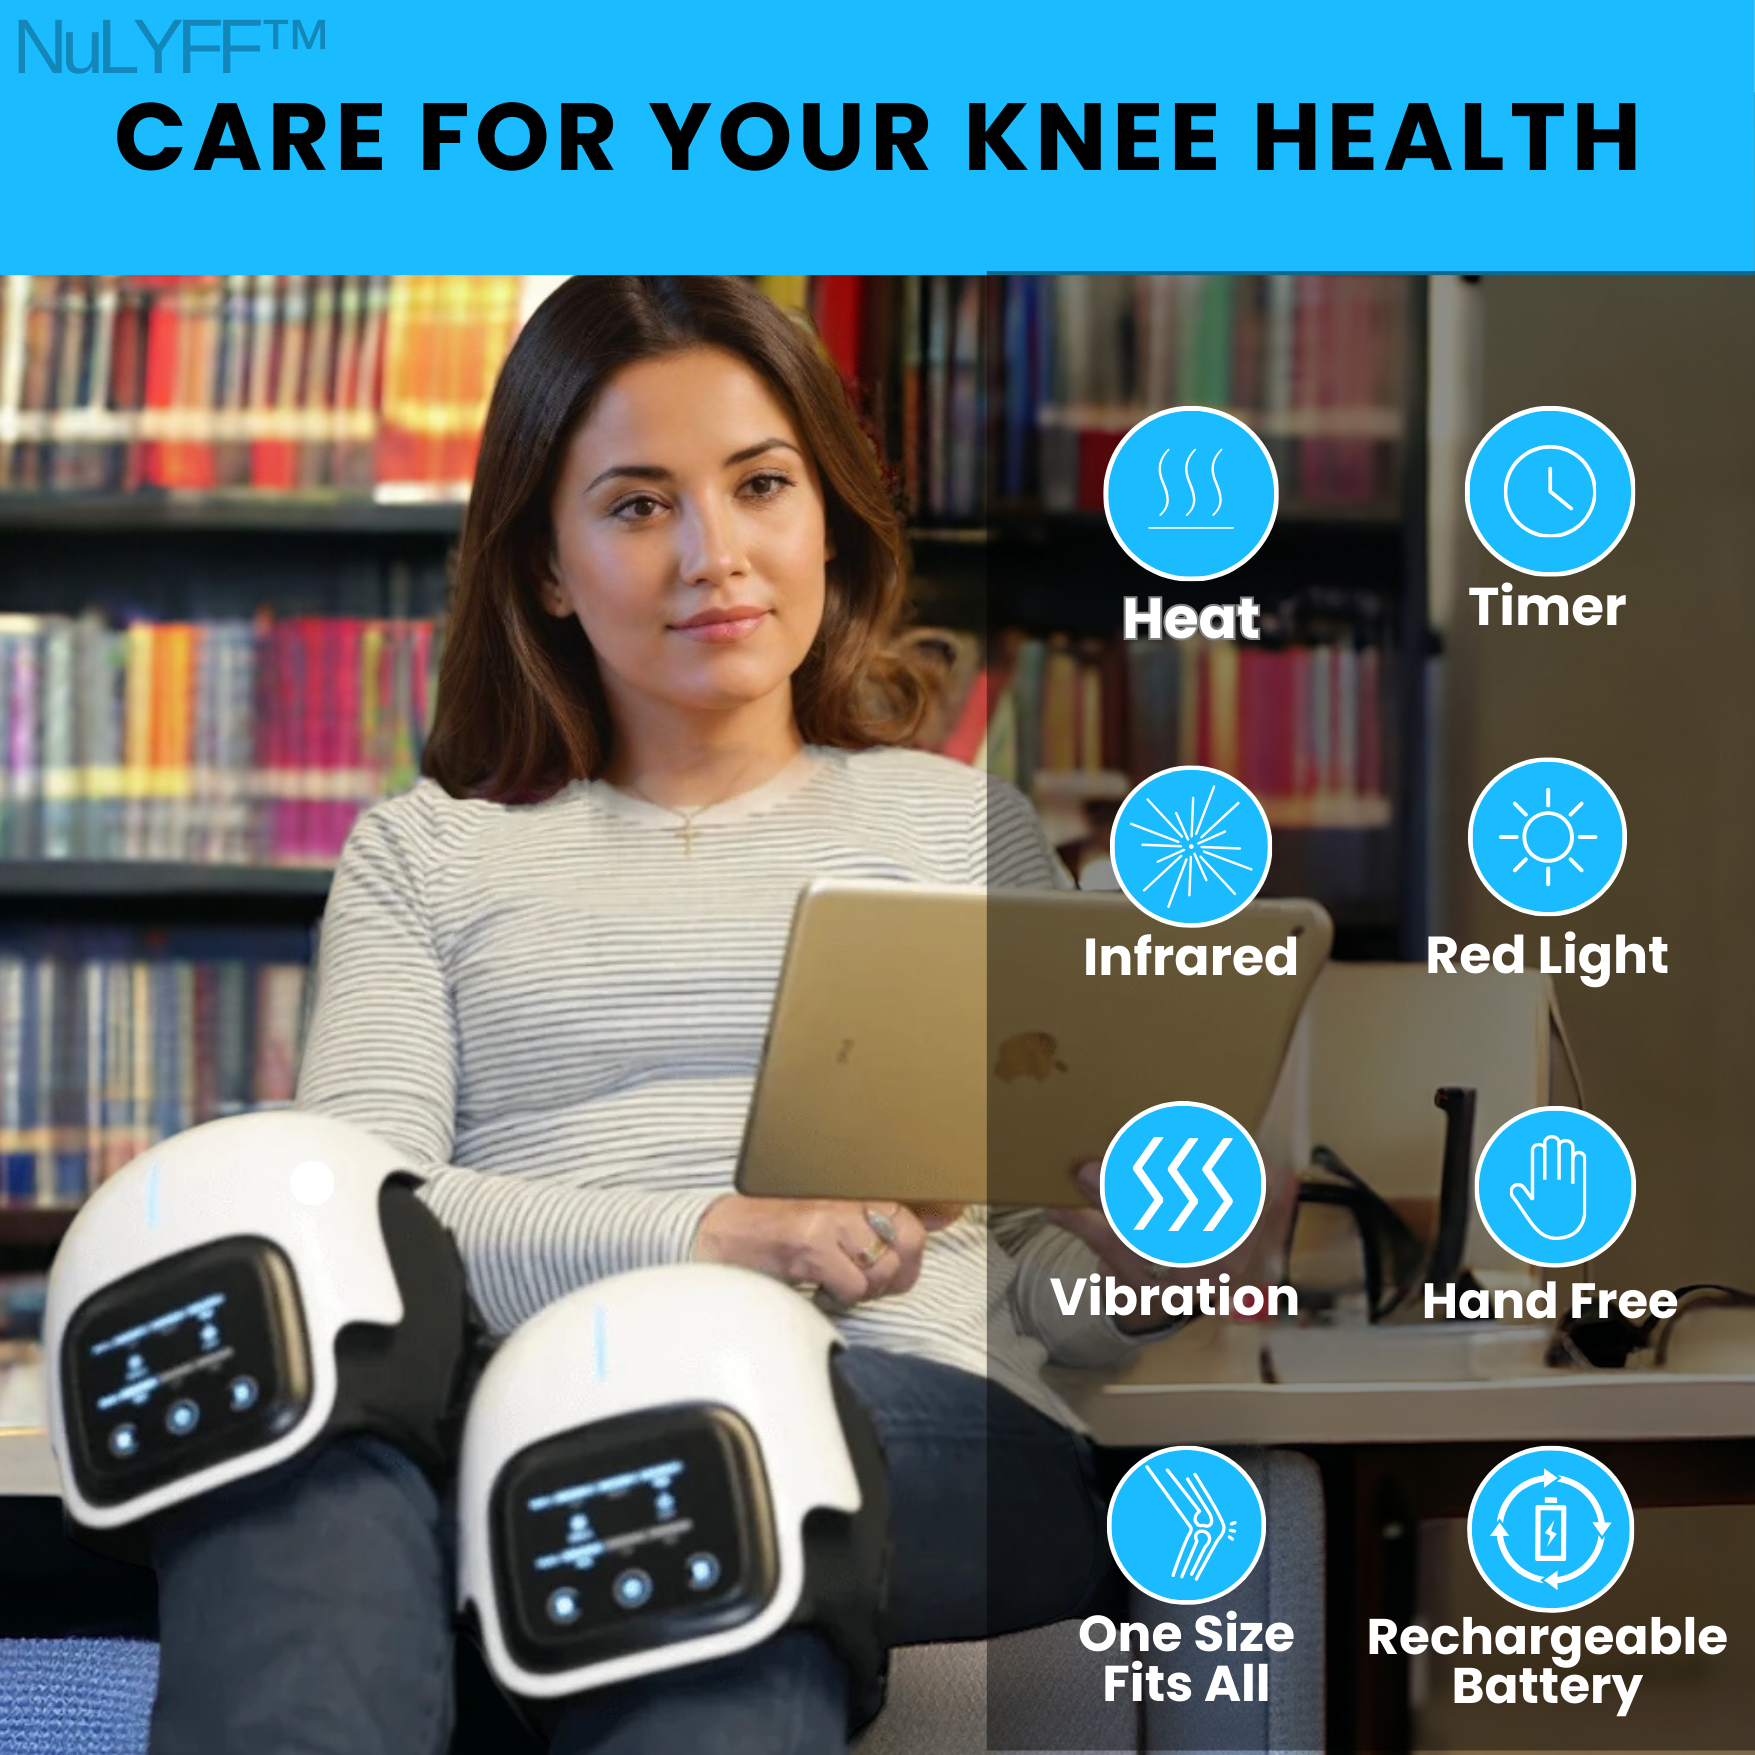 Image of young woman enjoying pain relief from NuLYFF™ Knee Massager on each leg. Unit is one size fits all, rechargeable battery, hands free operation, vibration, infrared, red light, timer, and heat logo on the image. Has a statement Care for your knee health at the top